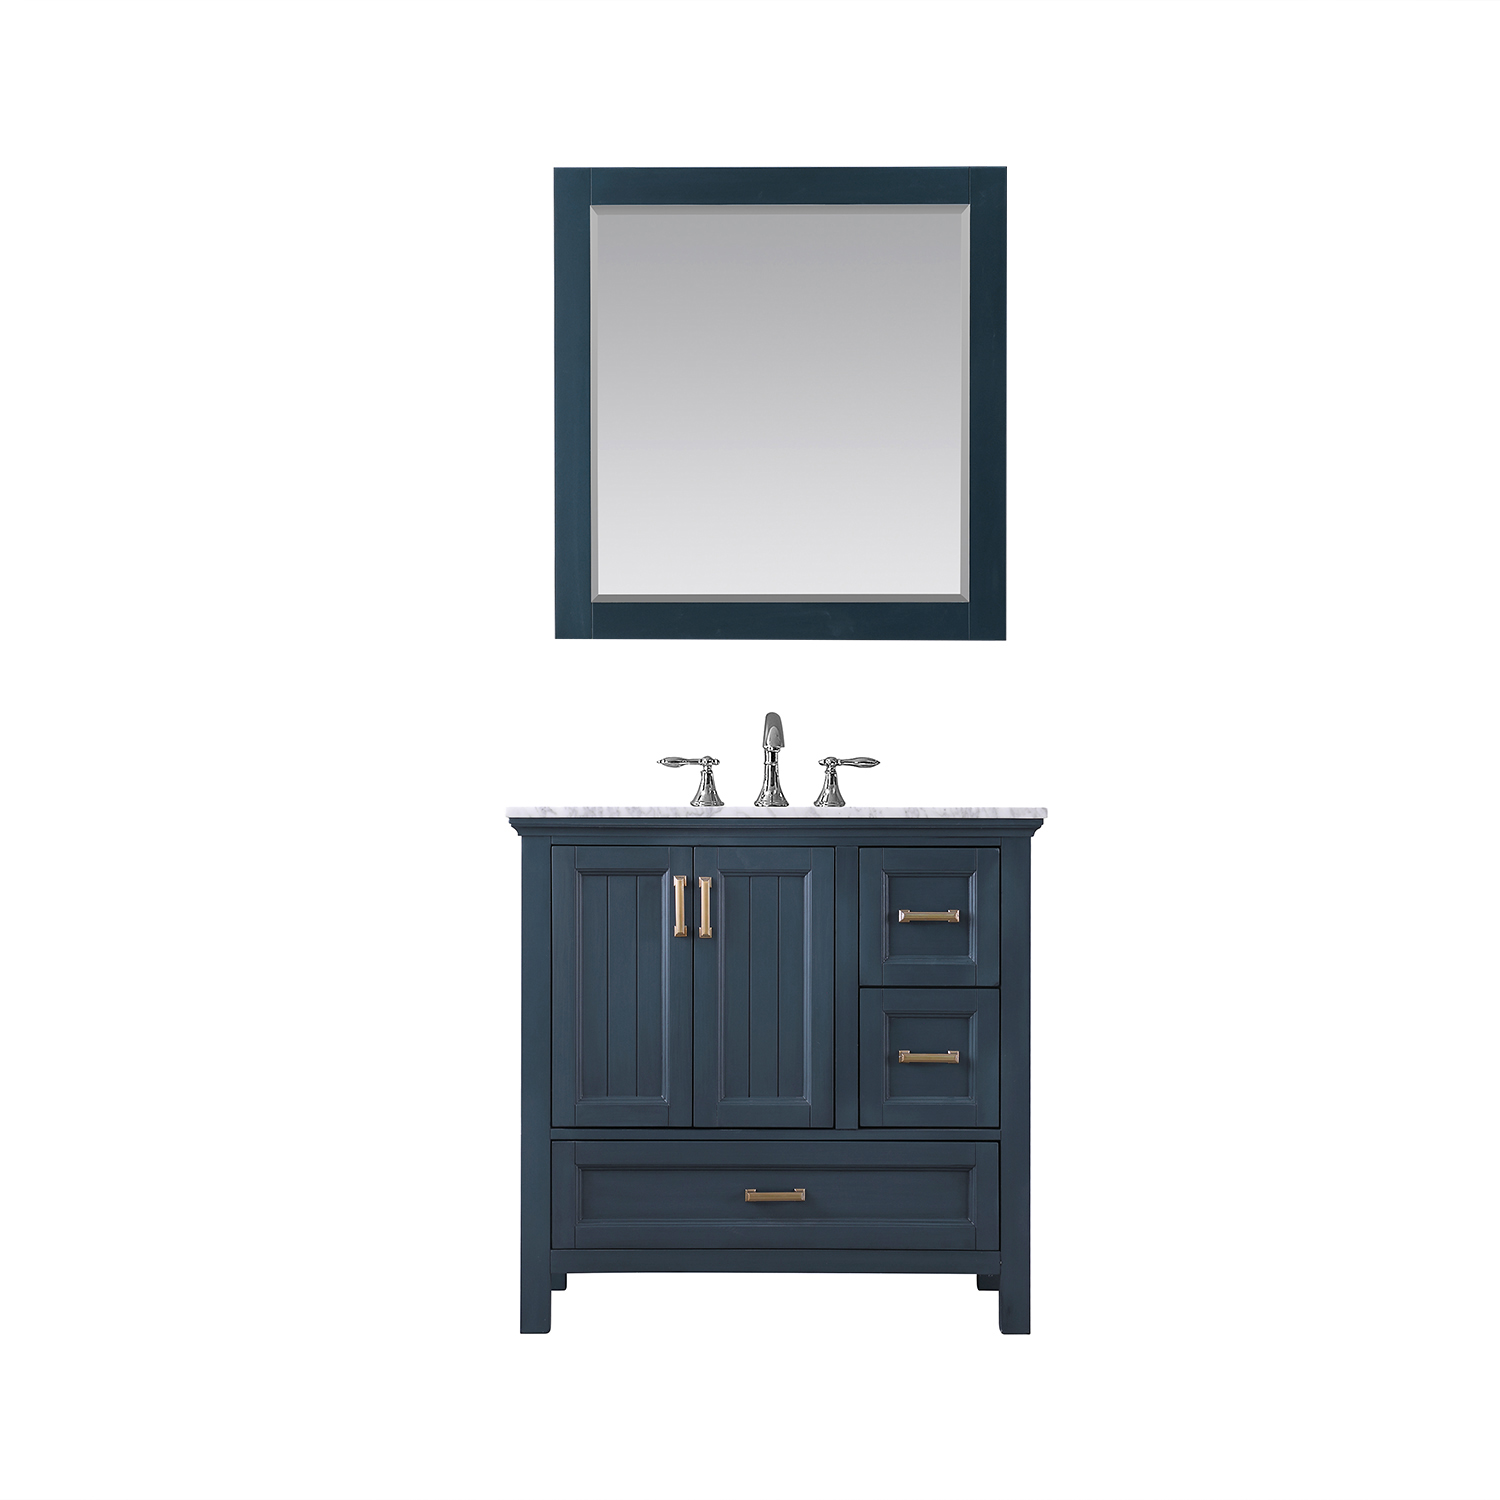 Issac Edwards Collection 36" Single Bathroom Vanity Set in Classic Blue and Carrara White Marble Countertop without Mirror 